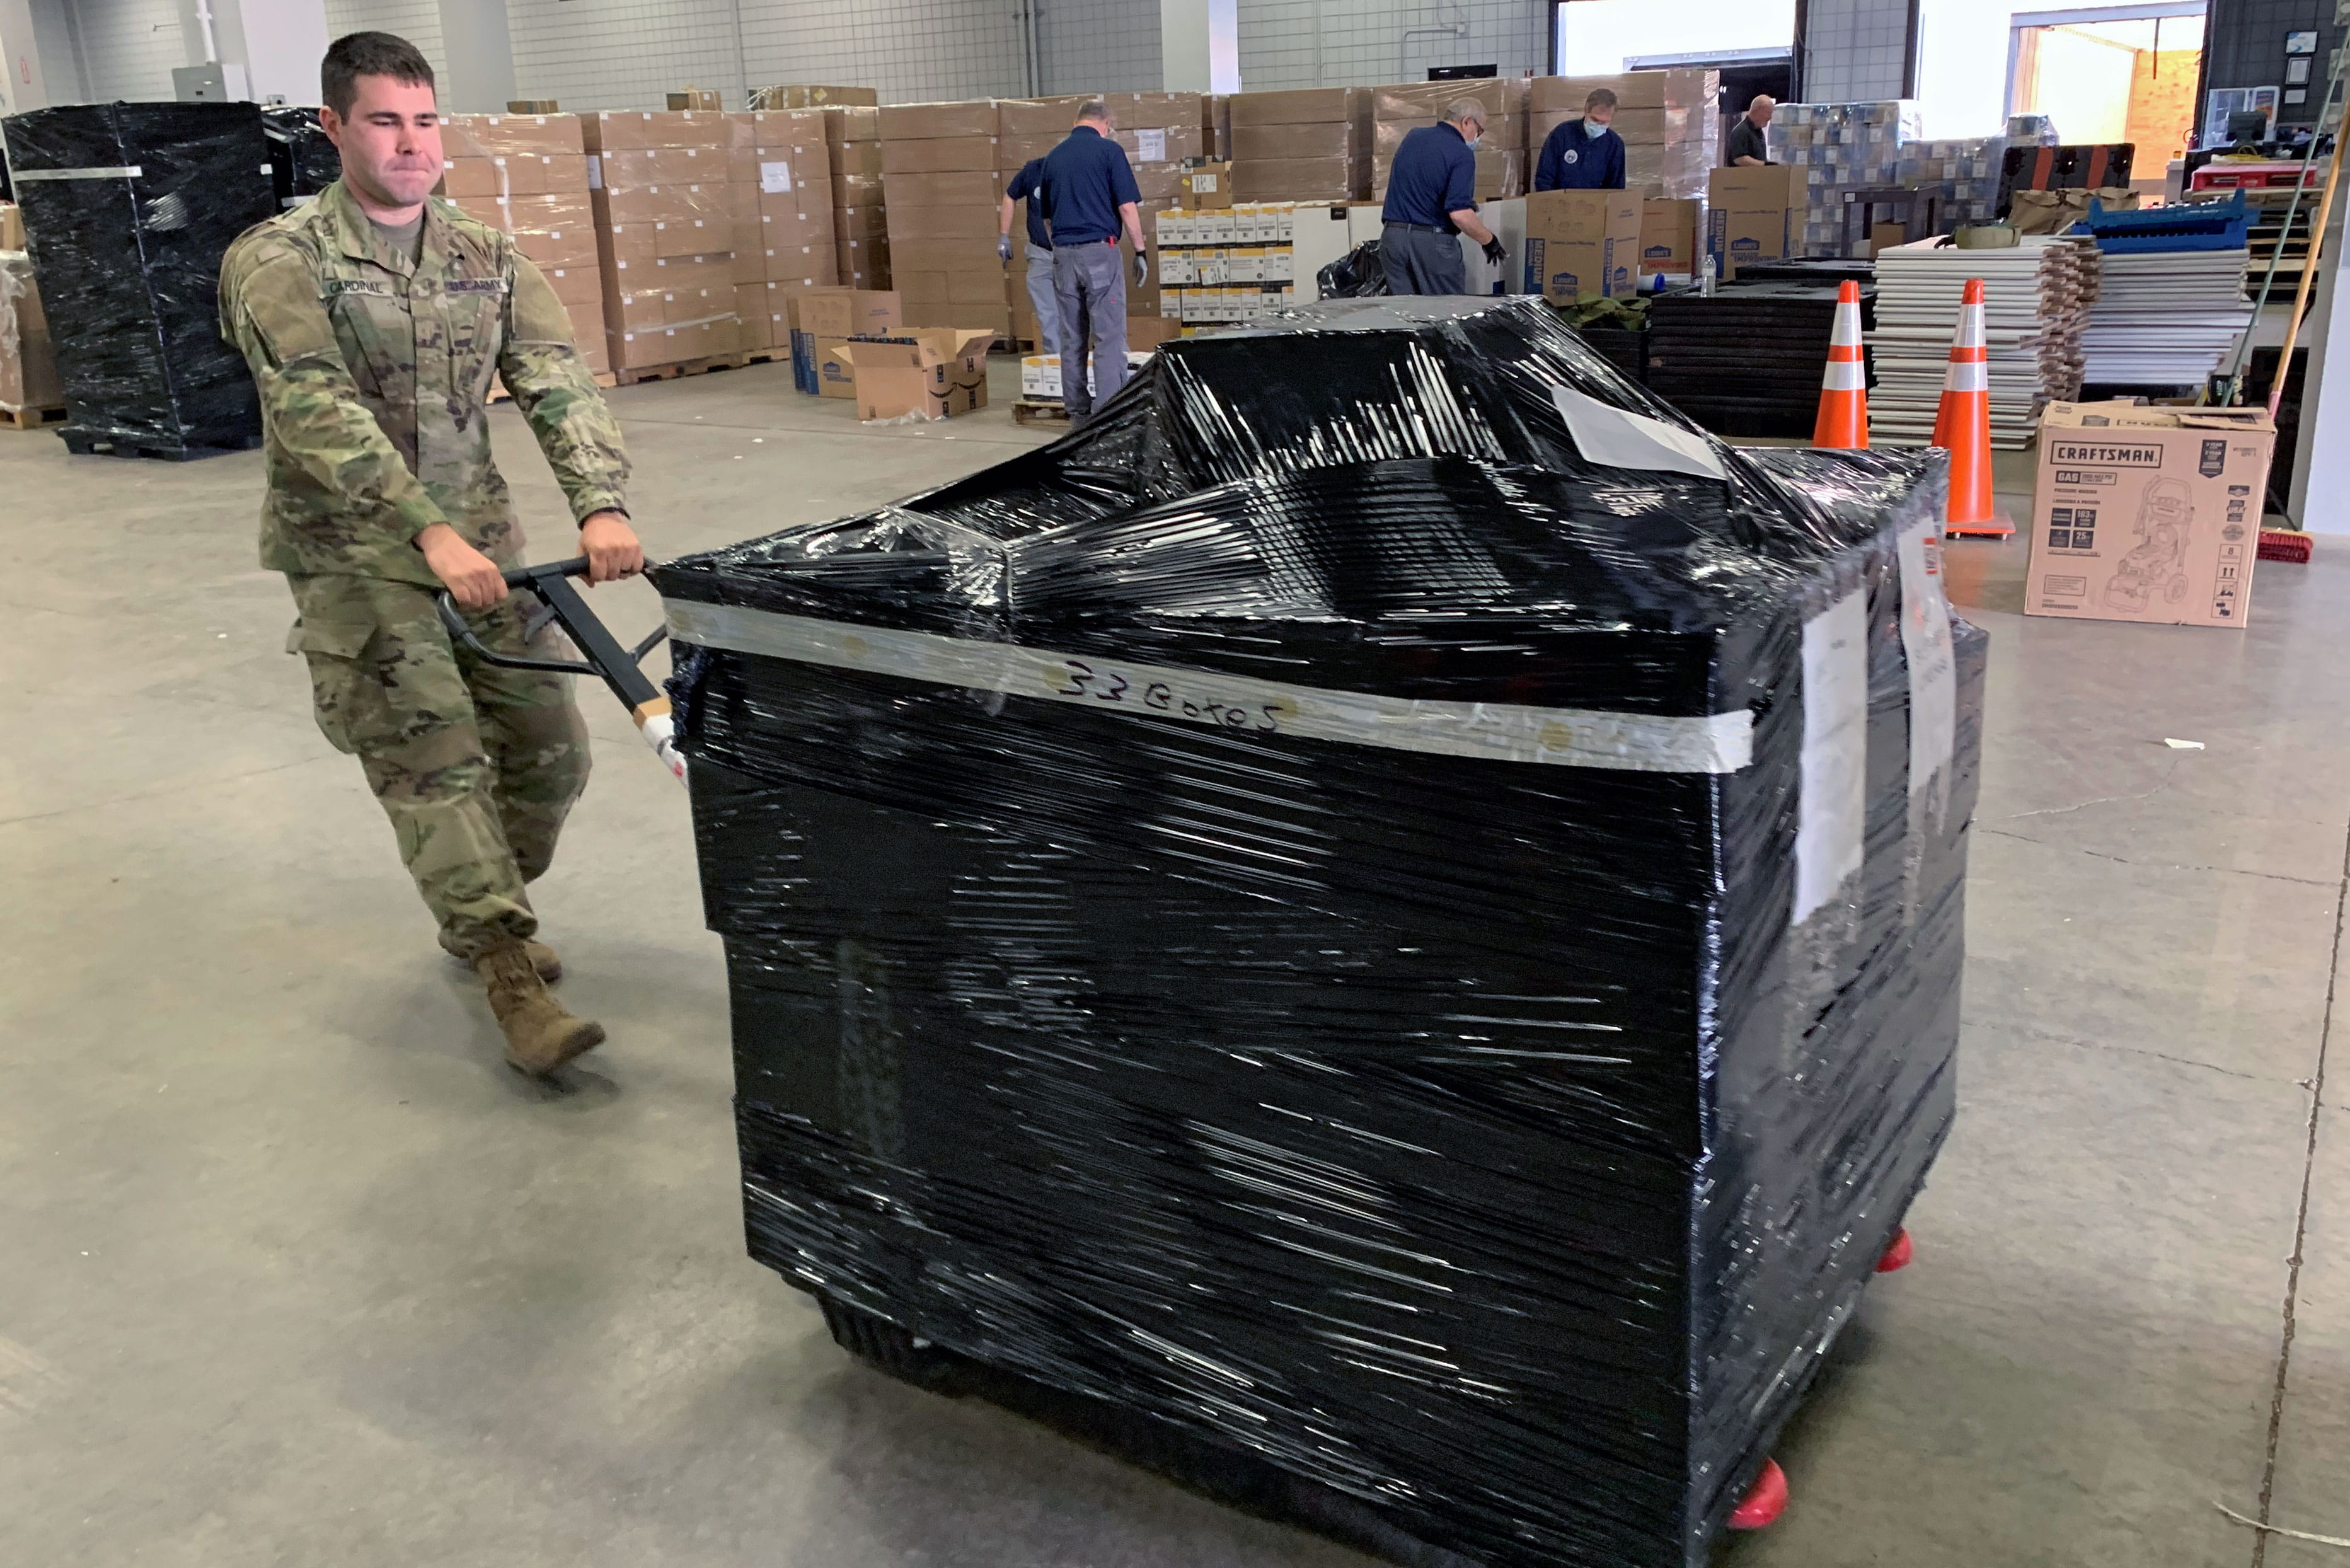 Army 2nd Lt. Jake Cardinal pulls a pallet of latex gloves in a warehouse full of personal protective equipment in Marlborough, Massachusetts. Cardinal’s civilian job is at Raytheon Intelligence & Space; however, after the COVID-19 outbreak, the governor activated Cardinal’s Guard unit. (U.S. Army photo by Spc. Elisamuel Jaime)